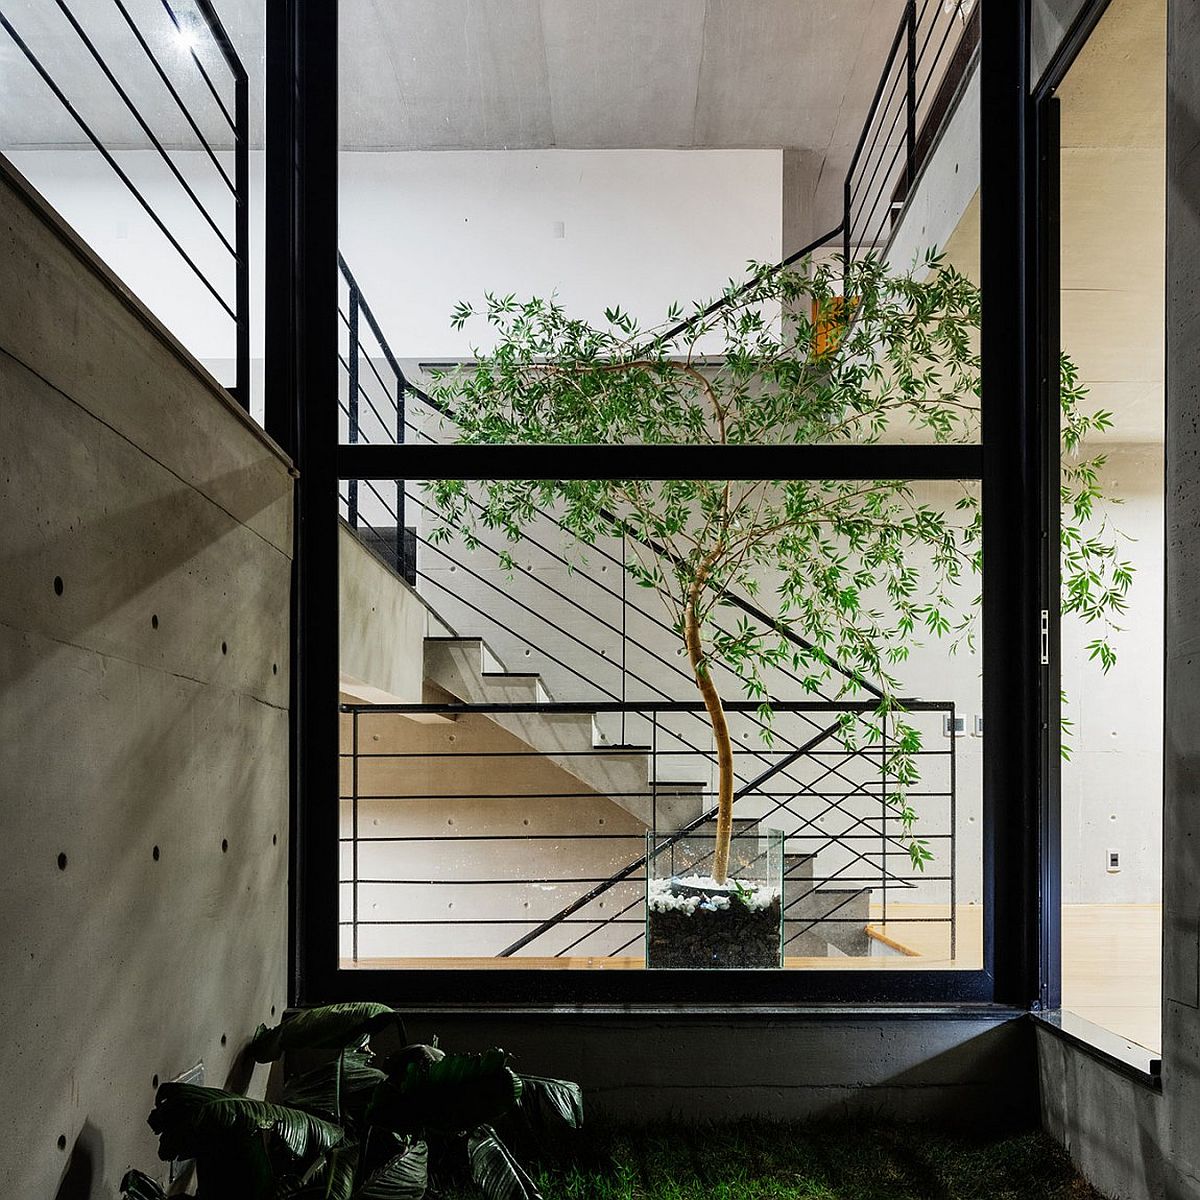 Fabulous way to ensure that greenery is a part of the interior